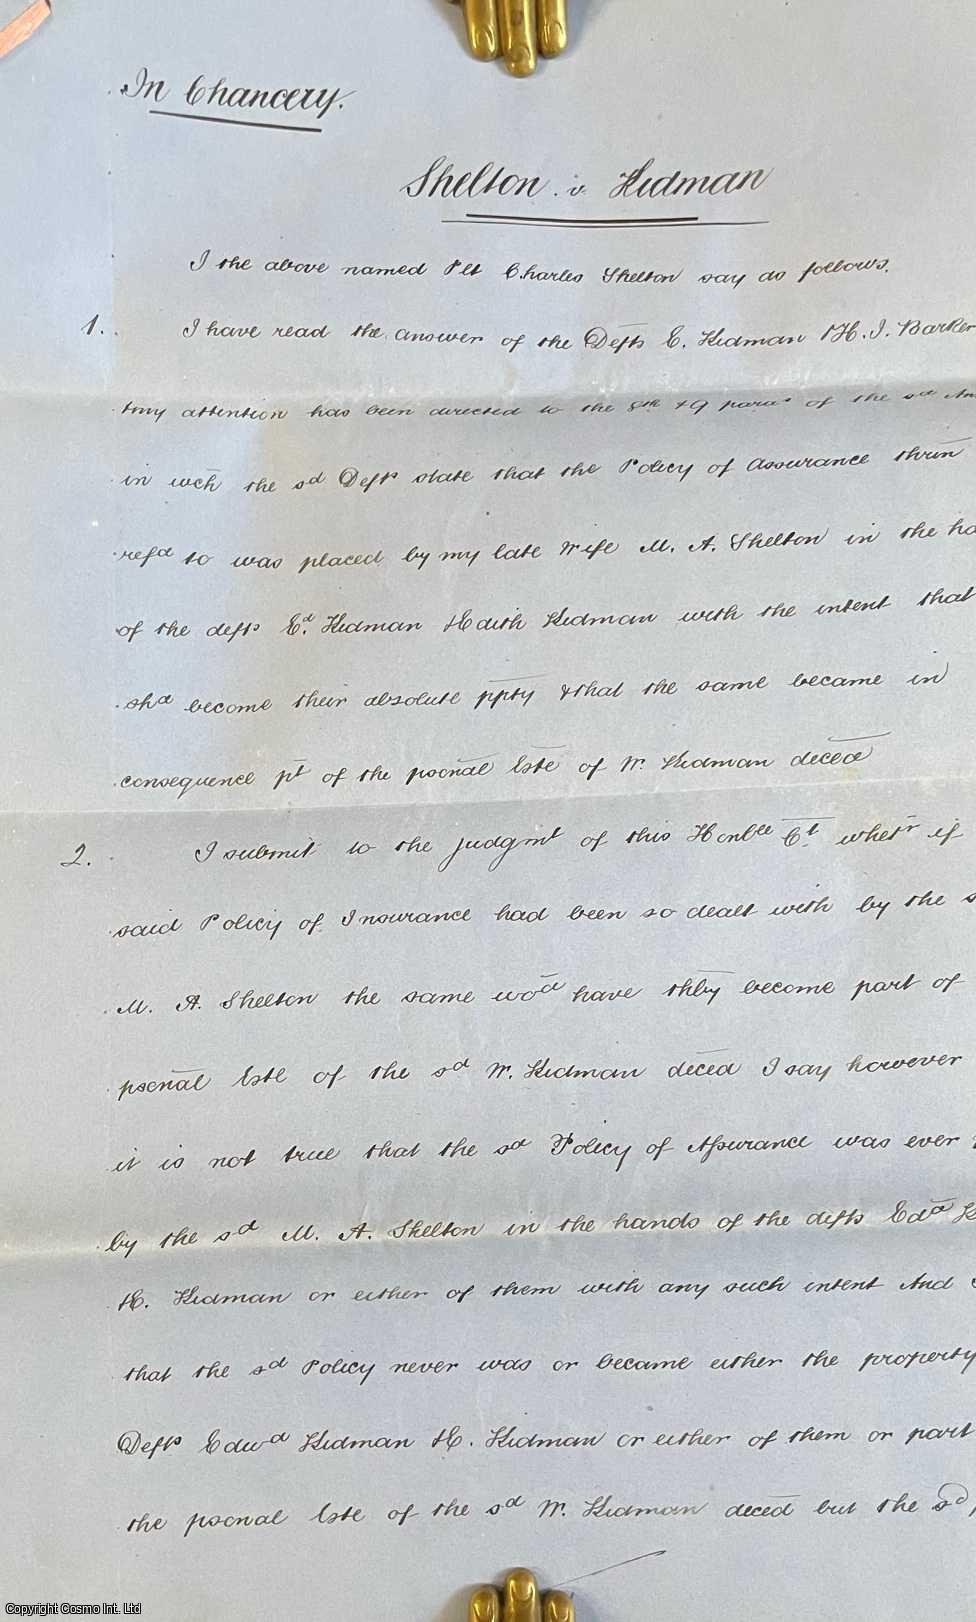 1872 Affidavit - Affidavit of Charles Shelton sworn at Bedford in July 1872 regarding the In Chancery case of Shelton v Hidman. A family dispute over the ownership of an insurance policy belonging to Mrs Ann Shelton formerly Mrs Ann Hidman. Ten pages, neatly handwritten on blue paper, tied at the left corner with pink ribbon.